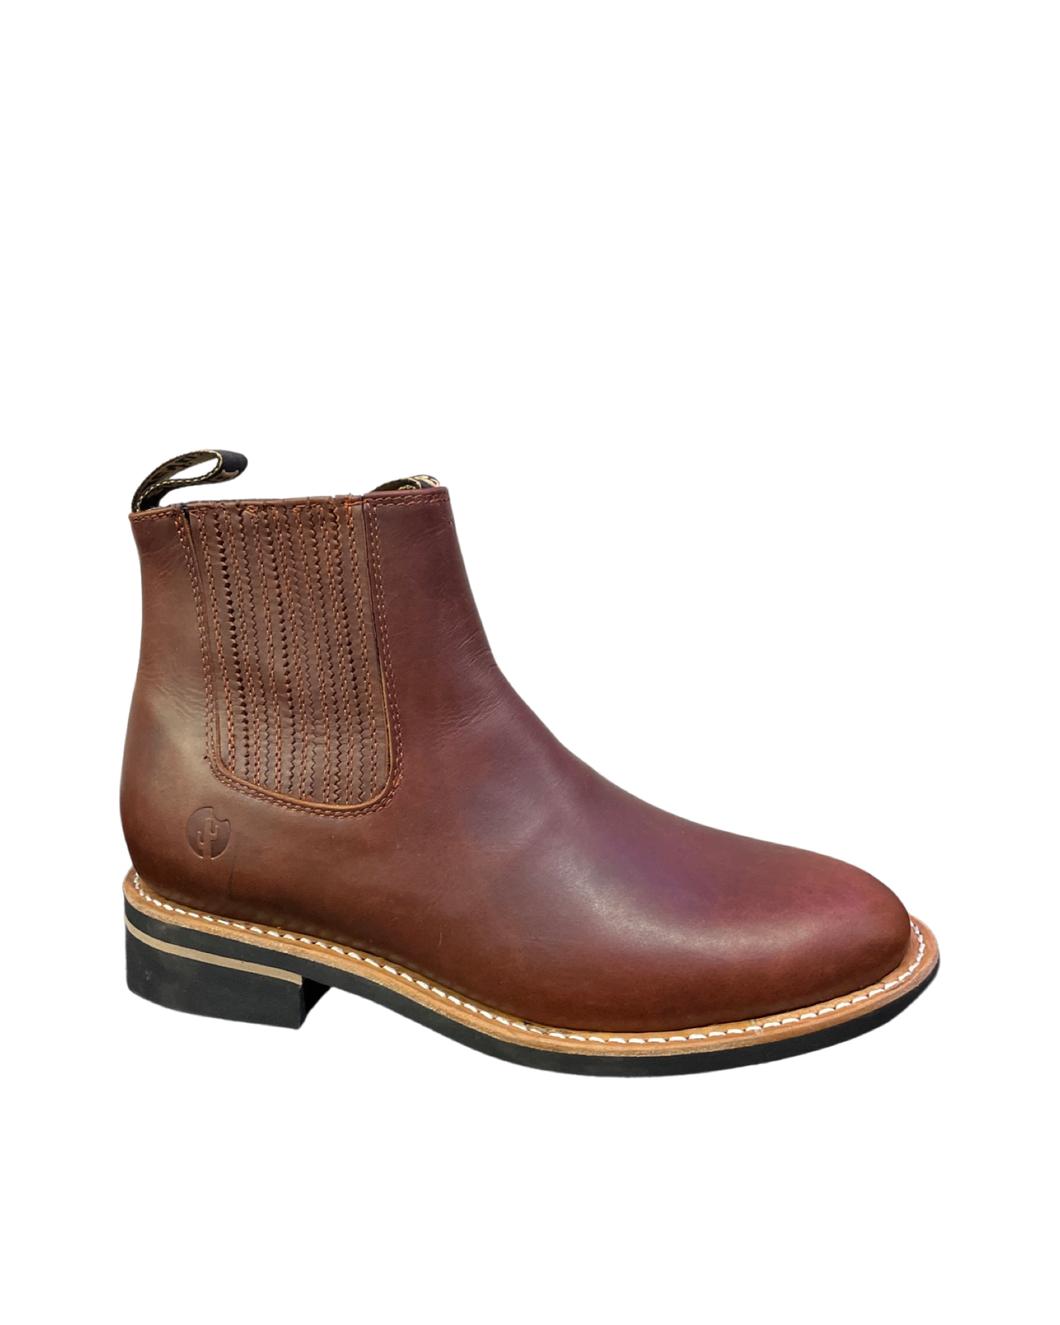 Cactus 7650 Shedron Boot